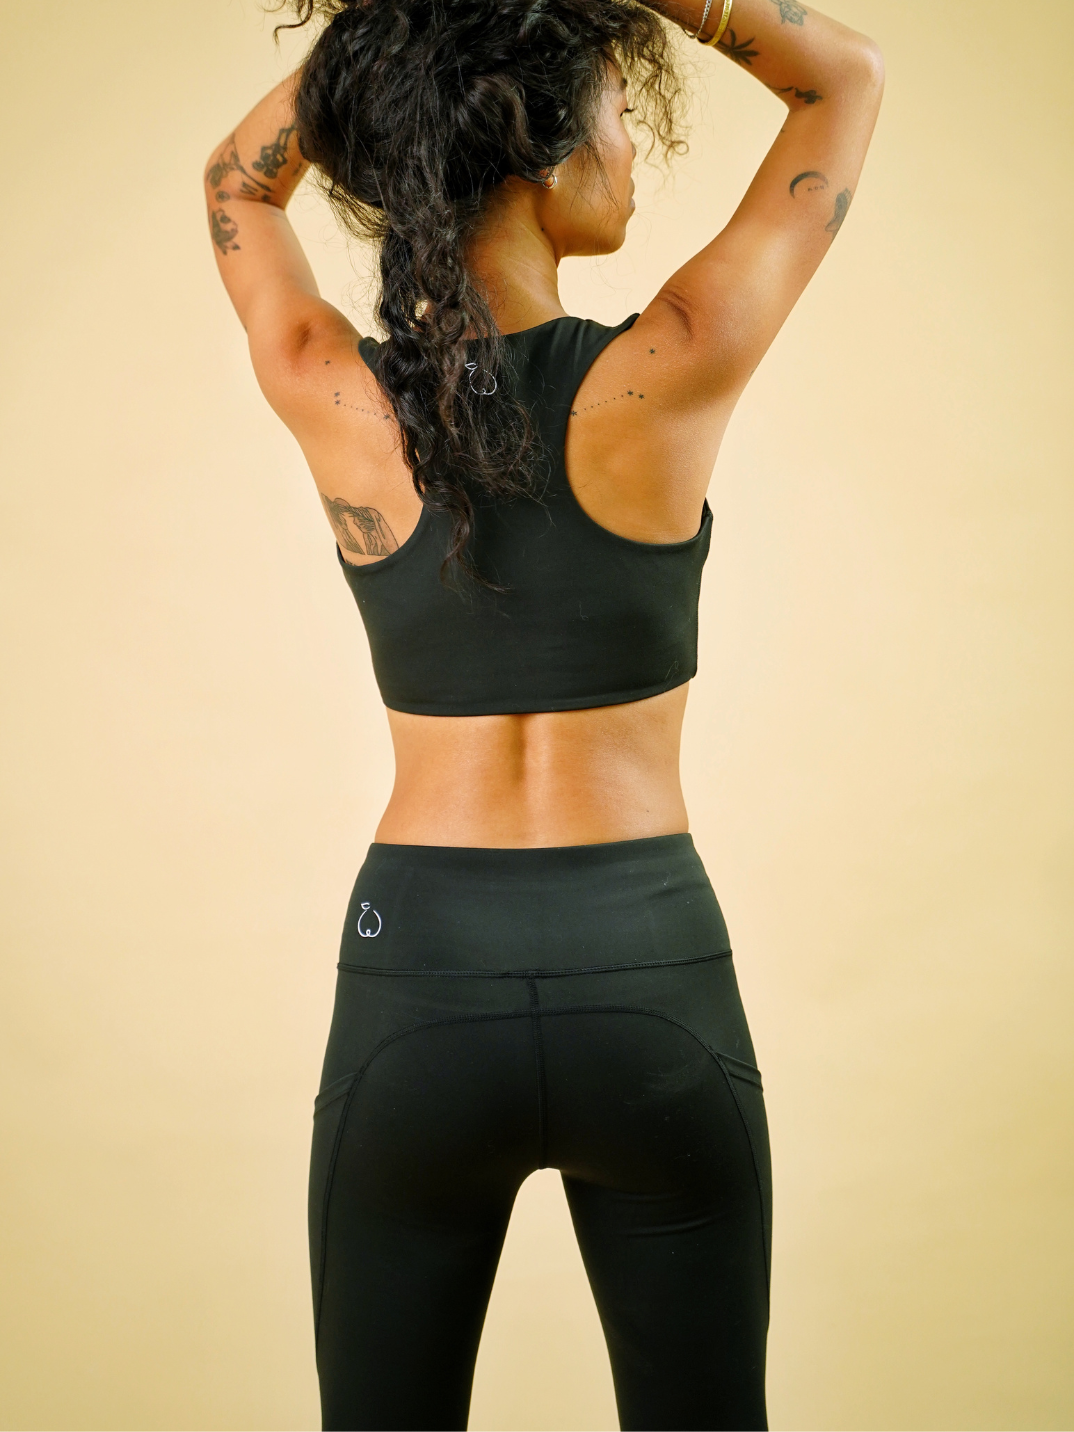 classic black hardcore leggings made from recycled materials sustainable brand activewear leggings